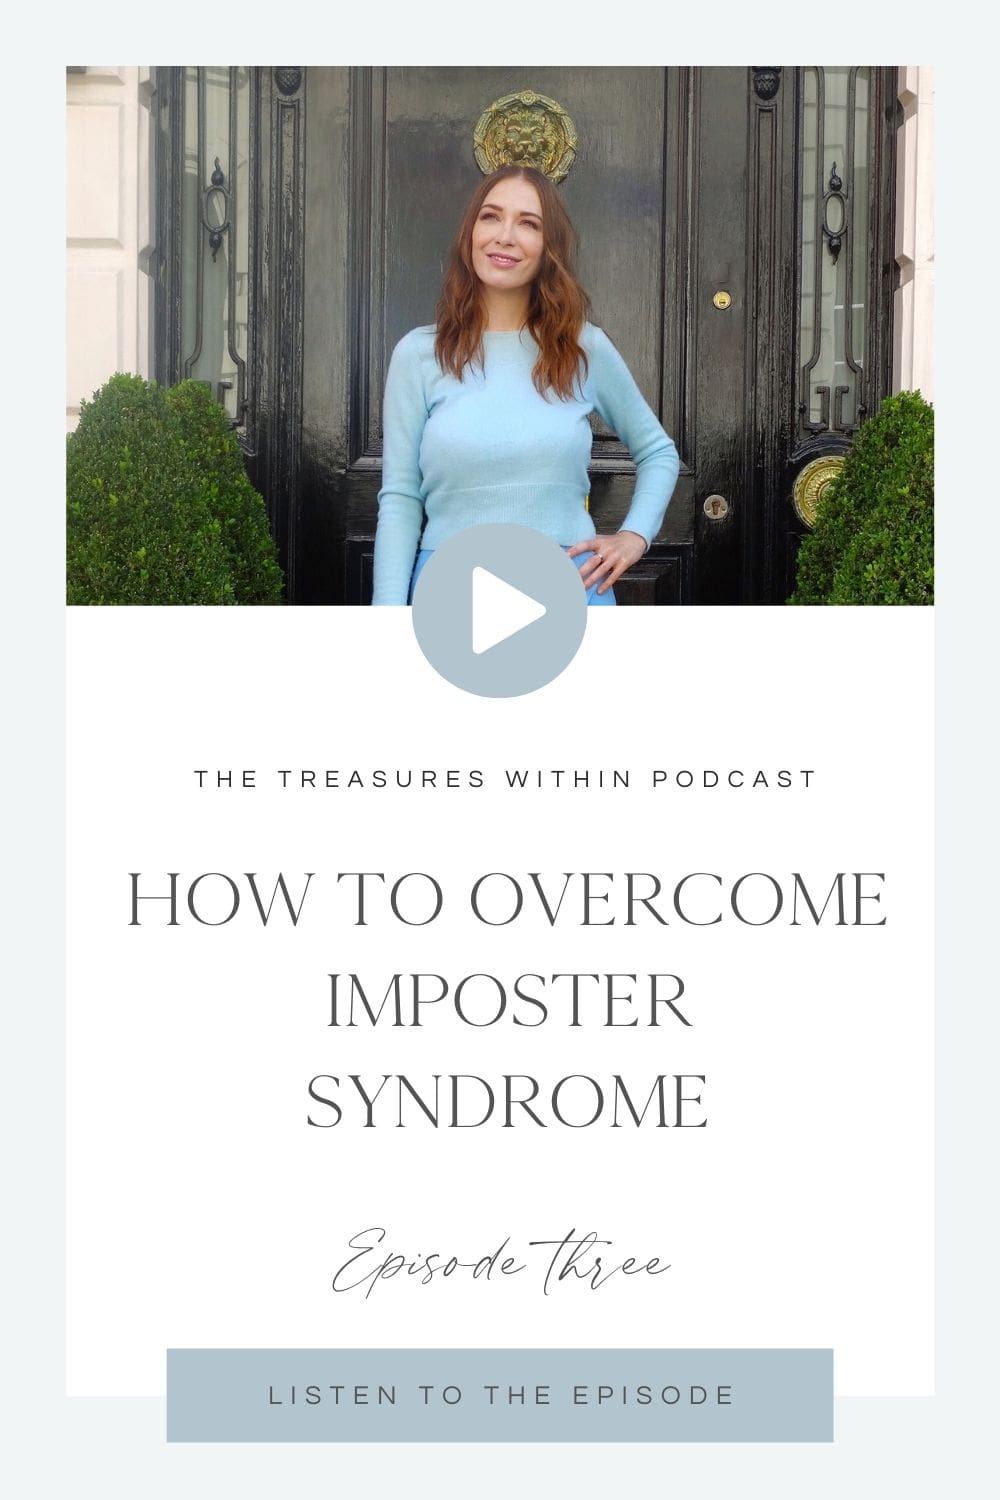 How to overcome imposter syndrome podcast episode